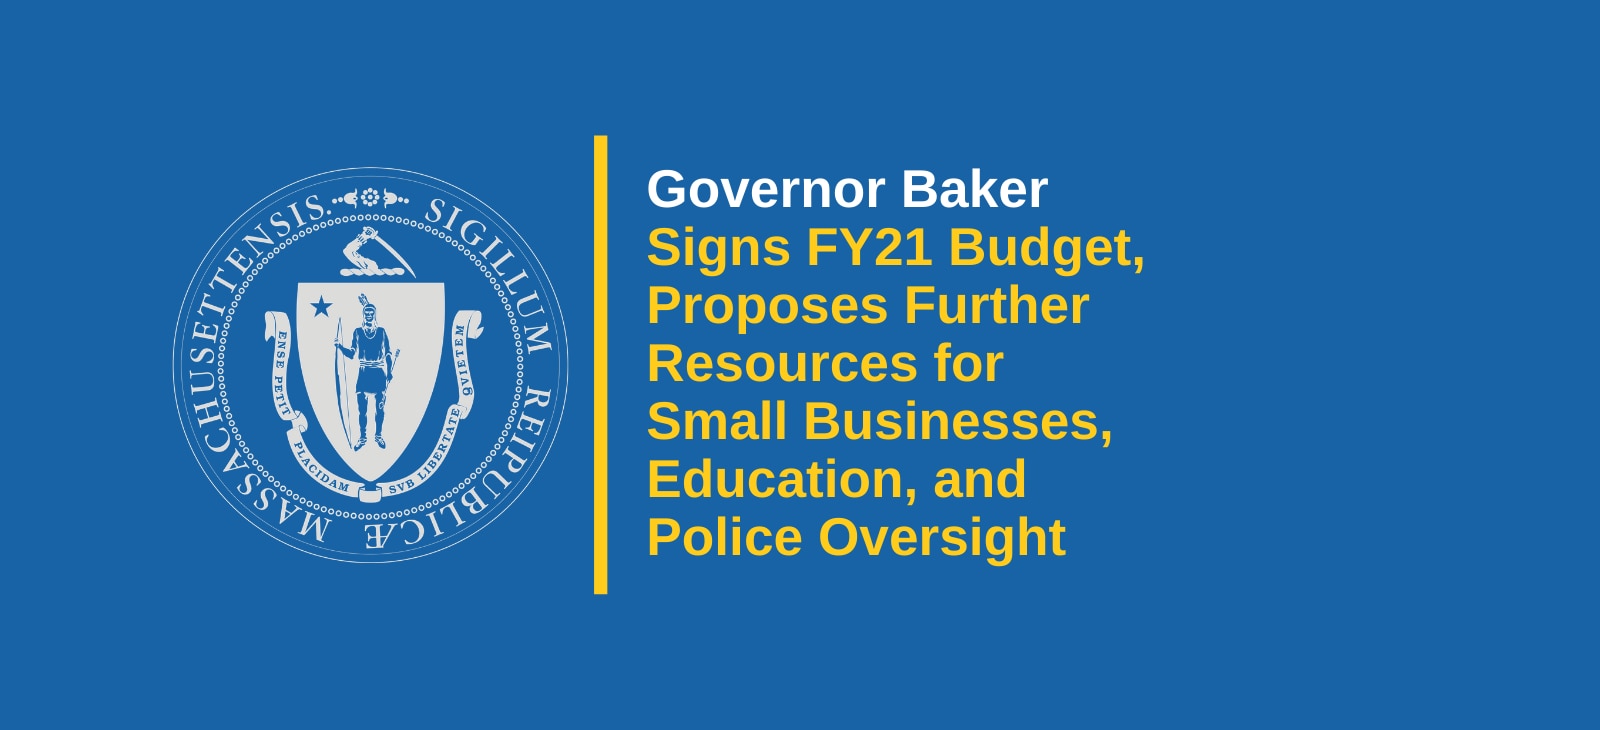 Governor Baker Signs Fiscal Year 2021 Budget and Proposes Additional Resources for Small Businesses, Education, and Police Oversight